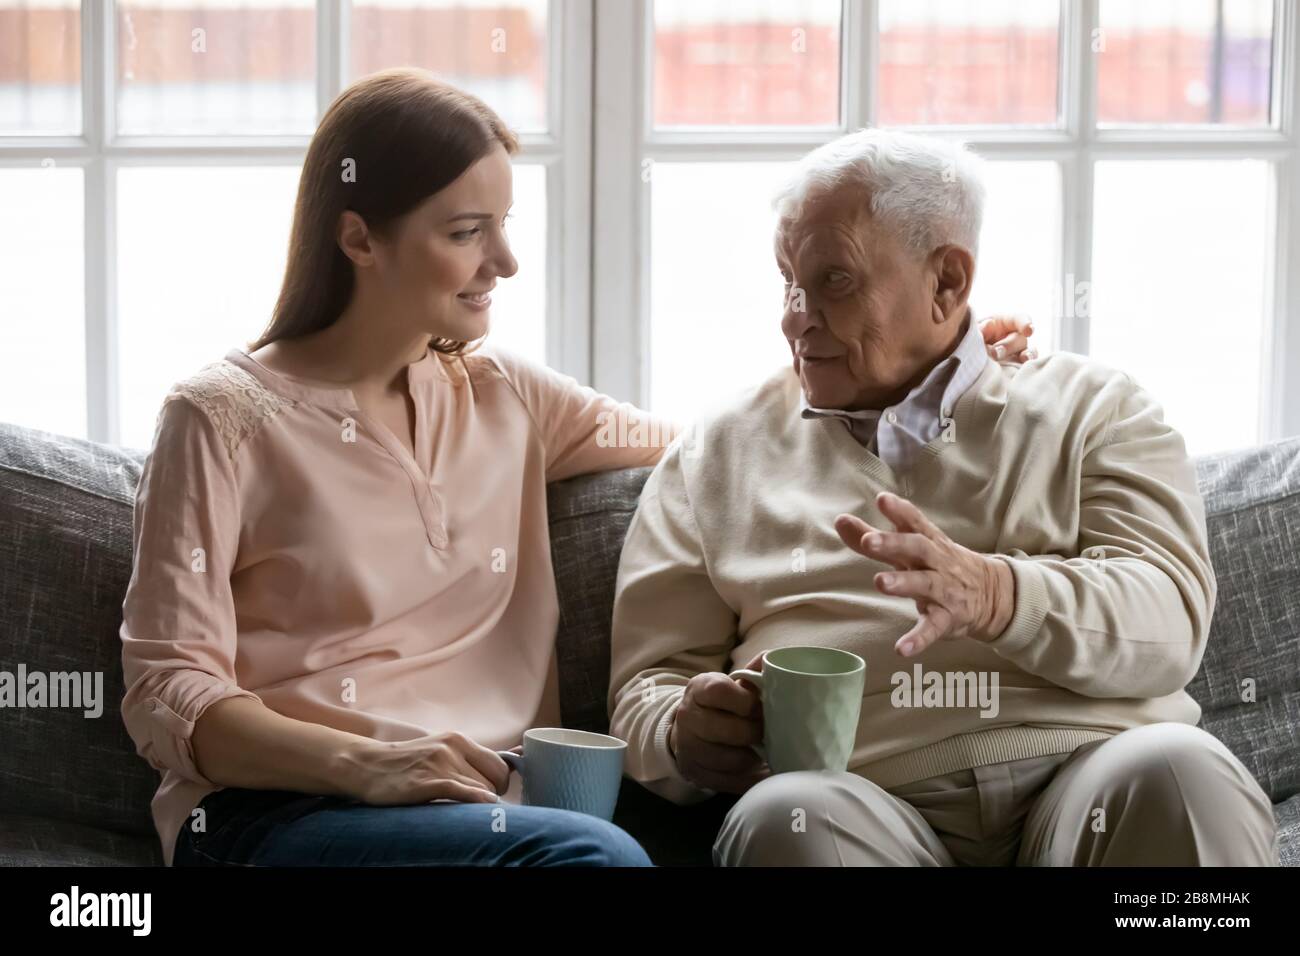 Adult daughter listens to aged father during teatime at home Stock Photo